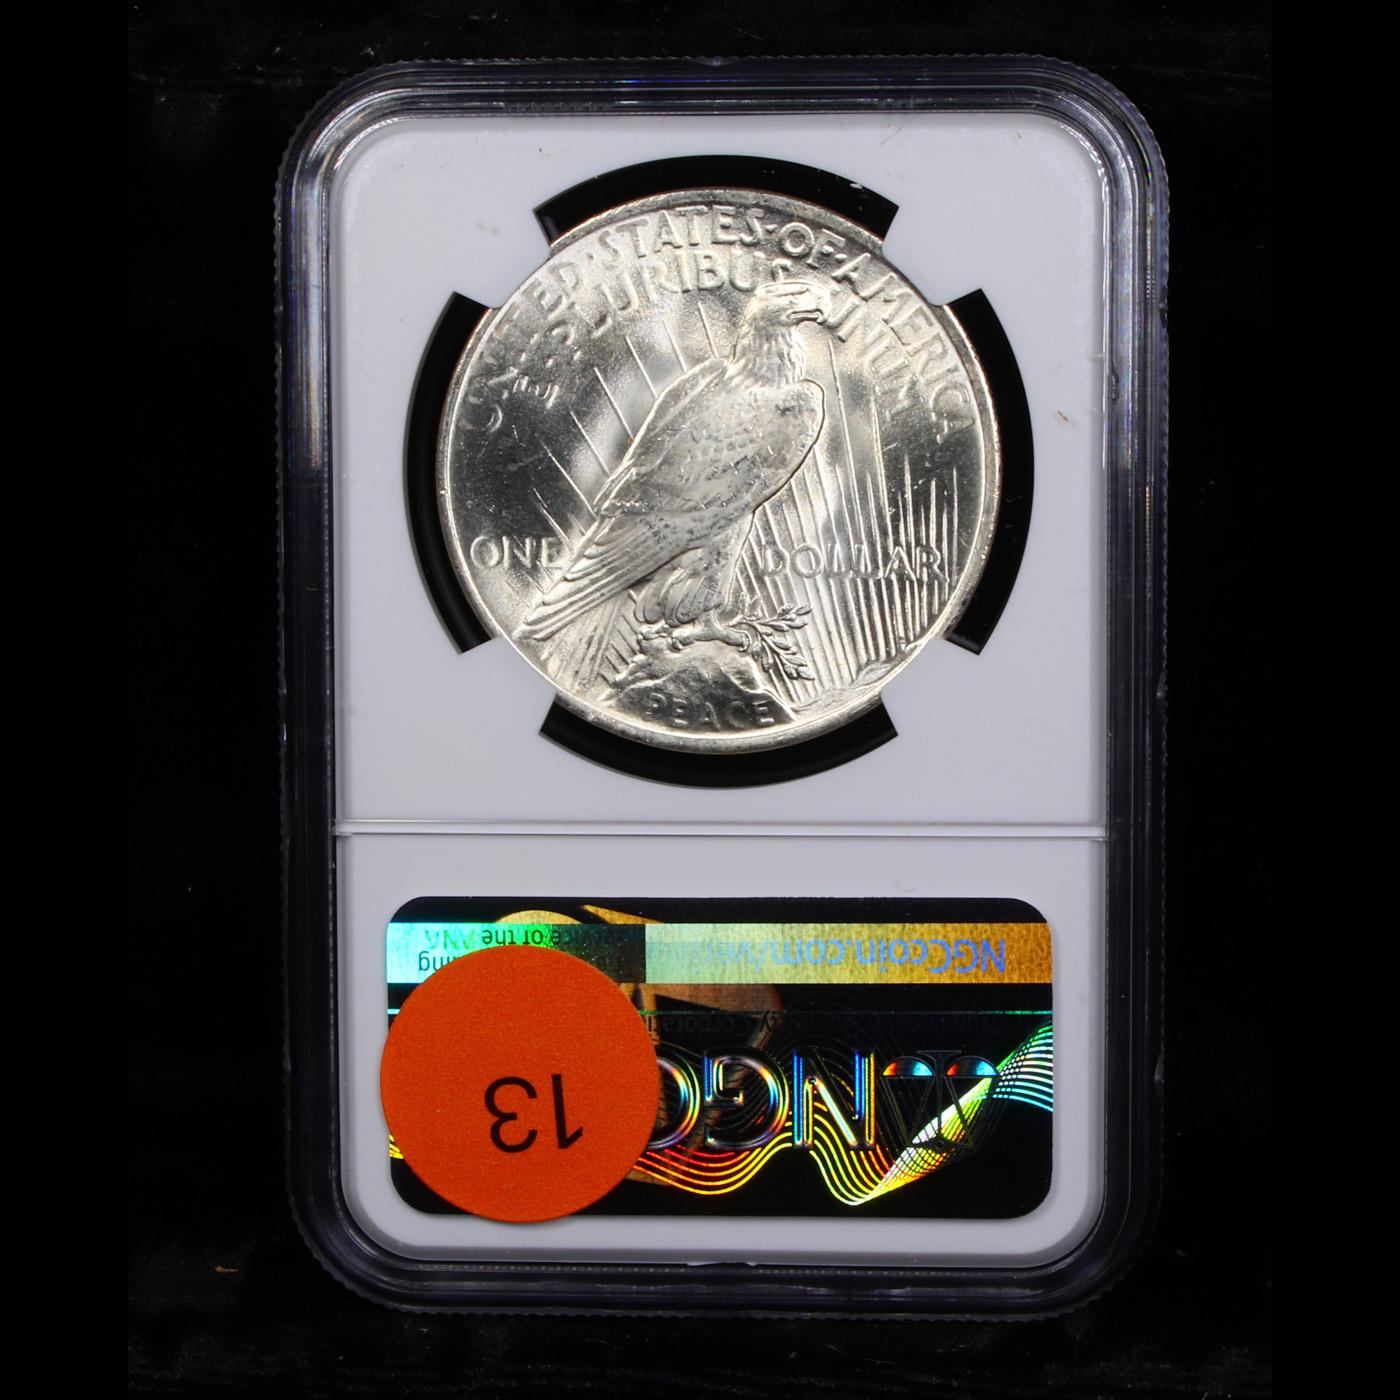 NGC 1923-p Peace Dollar $1 Graded ms65 By NGC